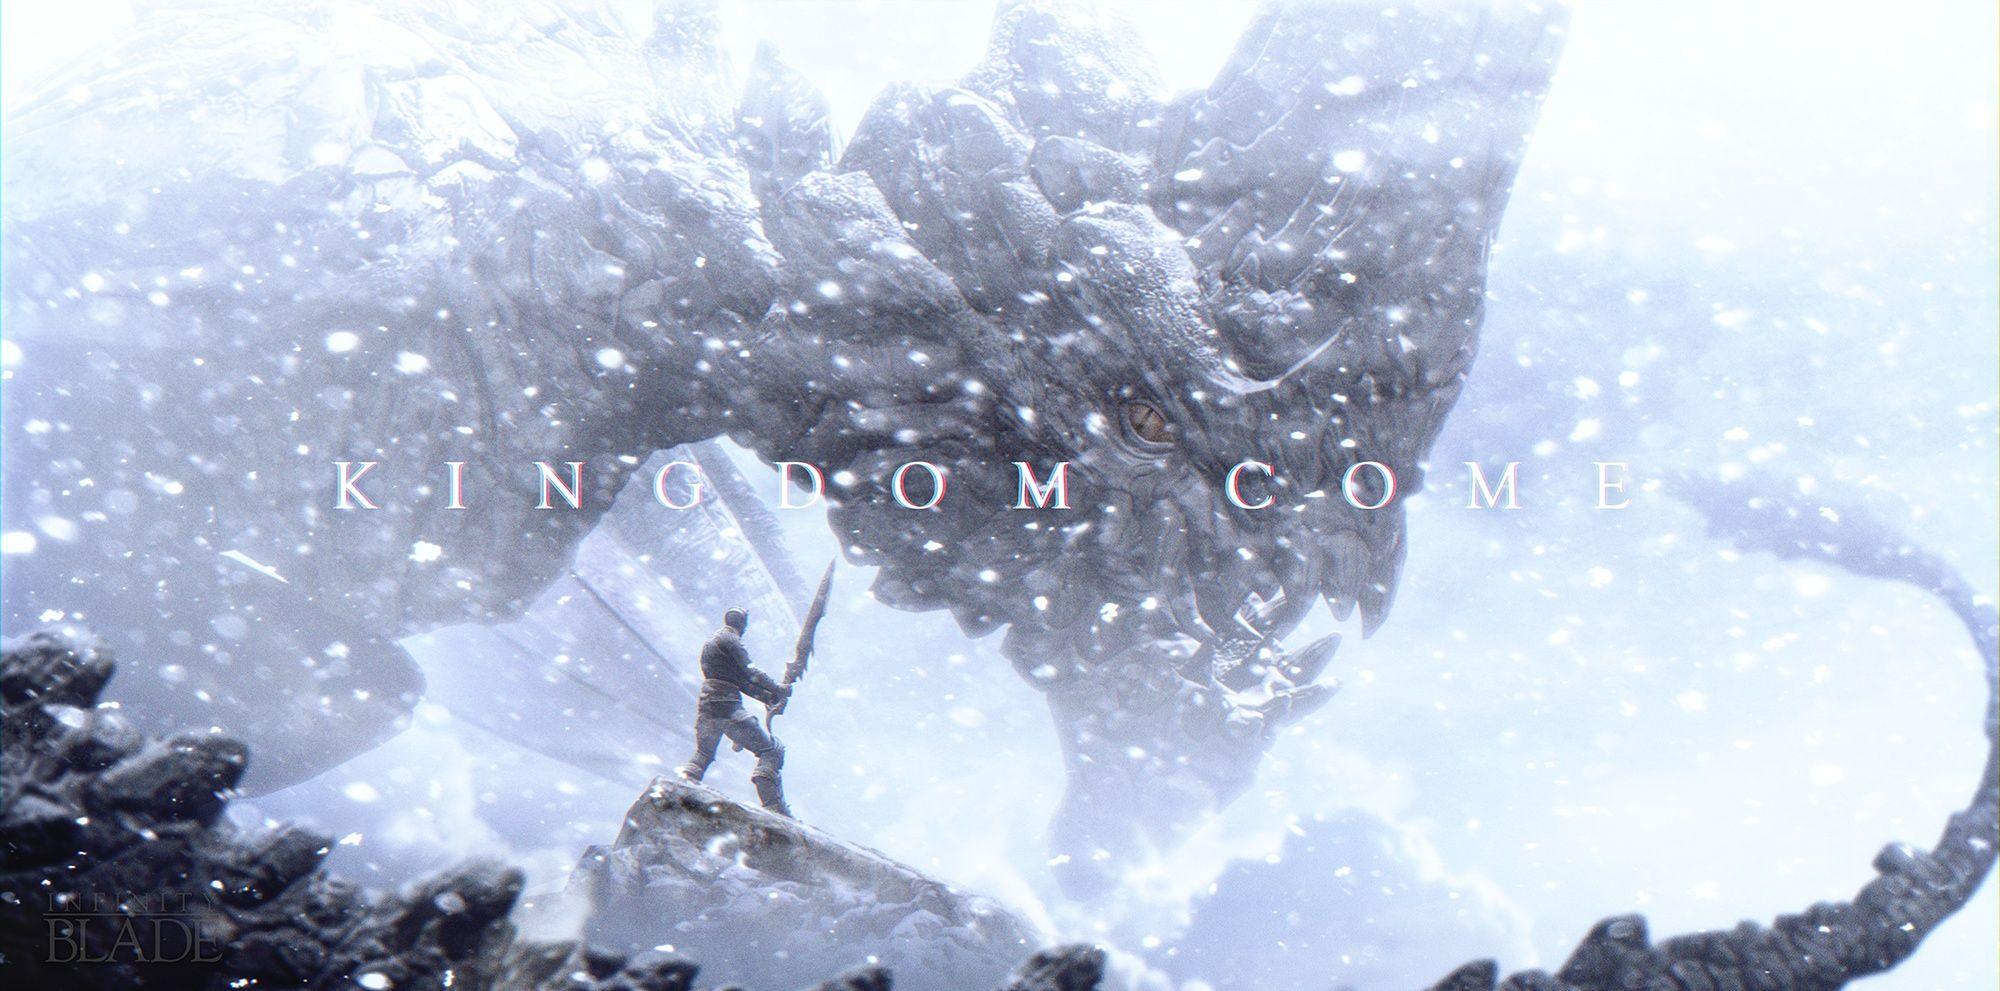 Infinity Blade III 'Kingdom Come' update is out with new maps